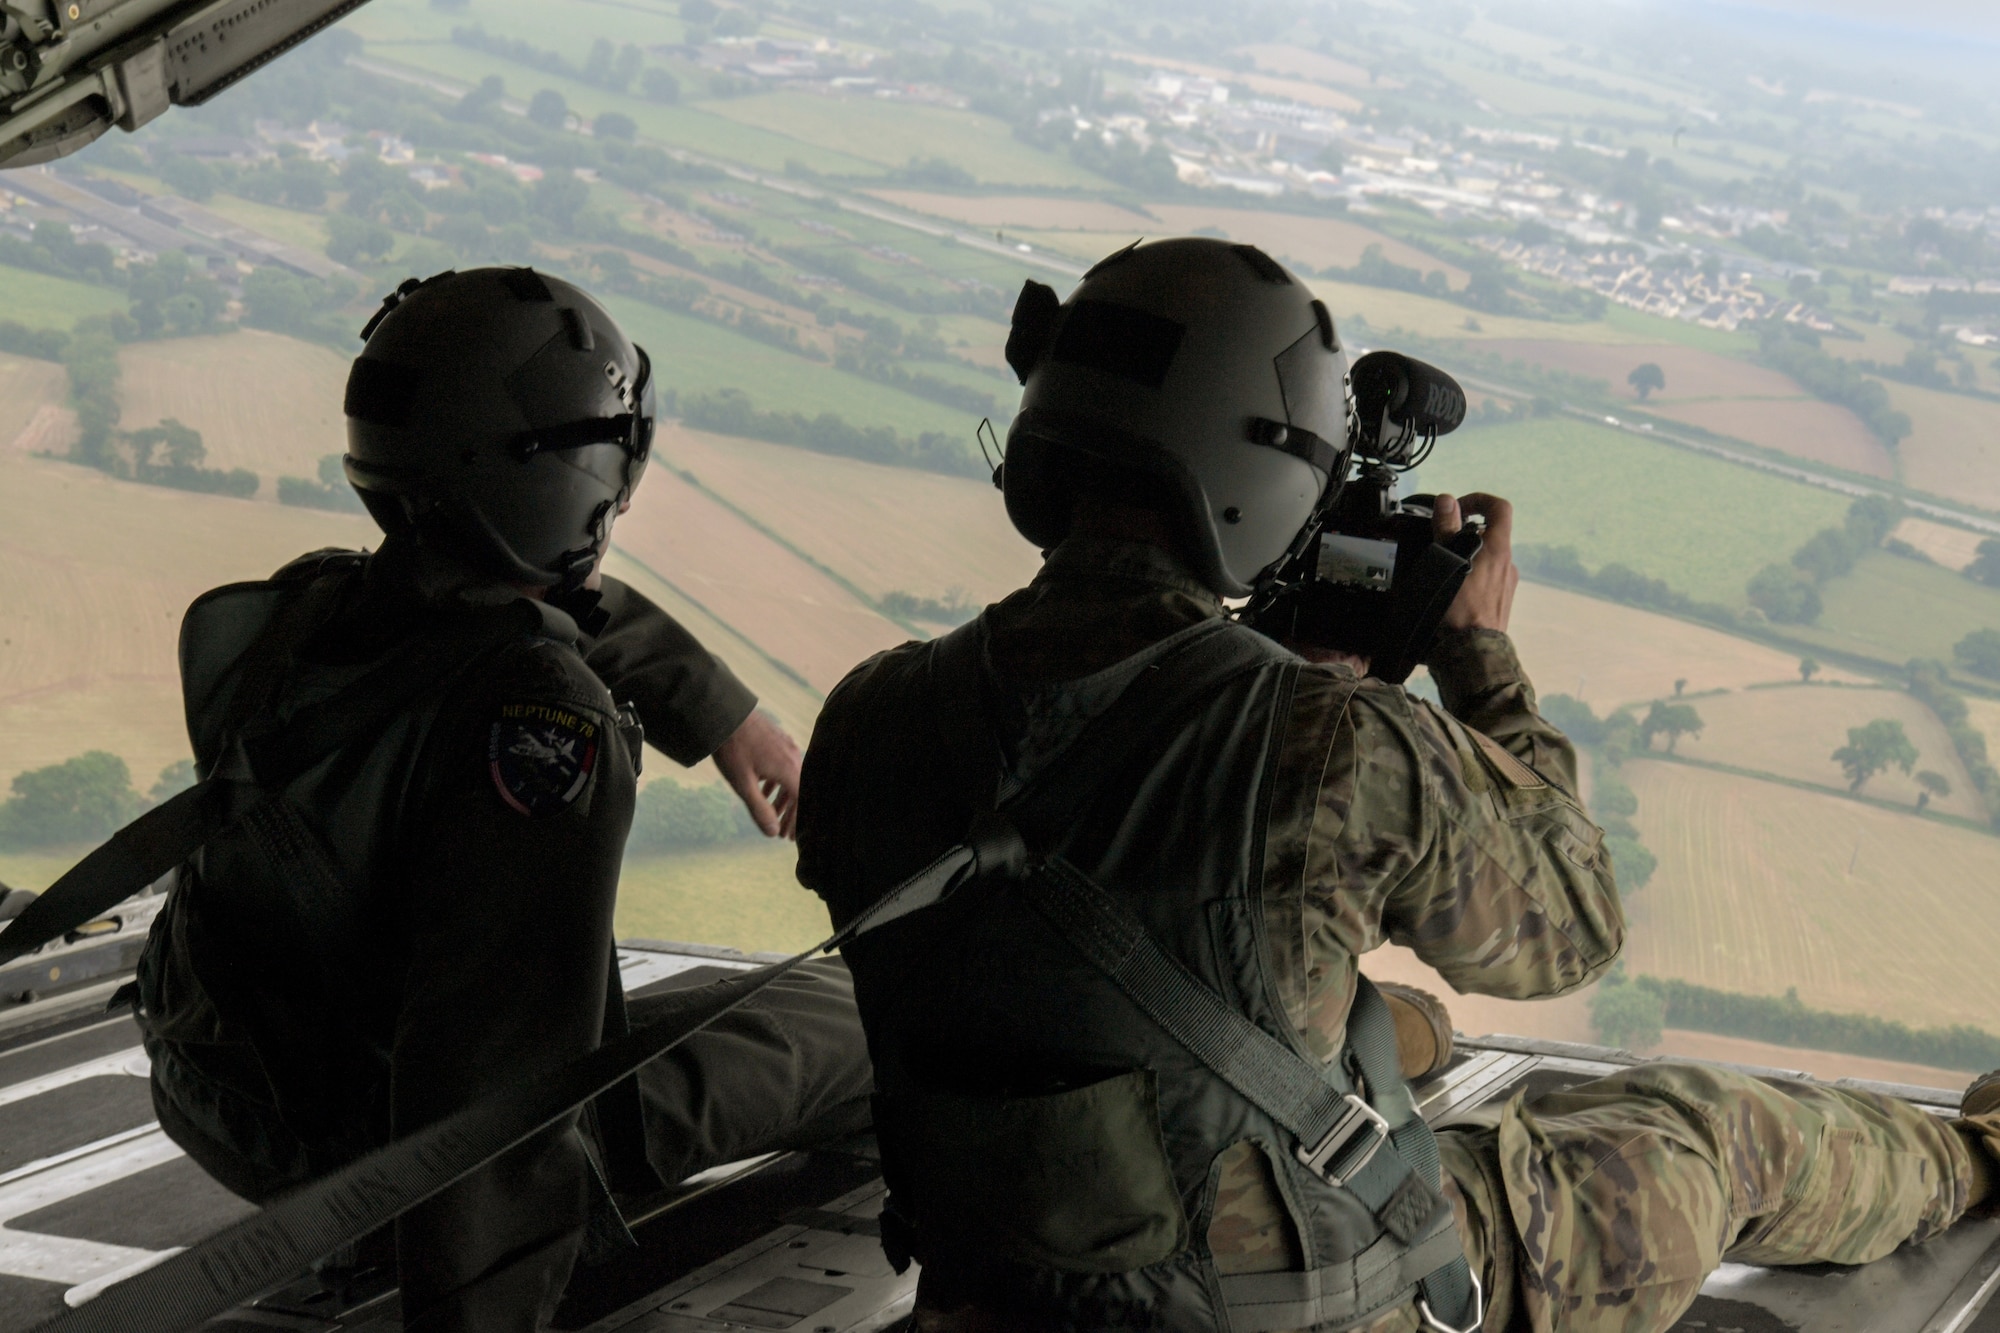 U.S. Air Force Senior Airman John Wright (right), 86th Airlift Wing public affairs journeyman, records footage of a flyover demonstration in Normandy, France, June 3, 2022. The 37th Airlift Squadron out of Ramstein Air Base, Germany, participated in multiple memorial ceremonies and demonstrations to pay tribute to those who lost their lives on D-Day 78 years ago. (U.S. Air Force photo by Airman 1st Class Lauren Jacoby)